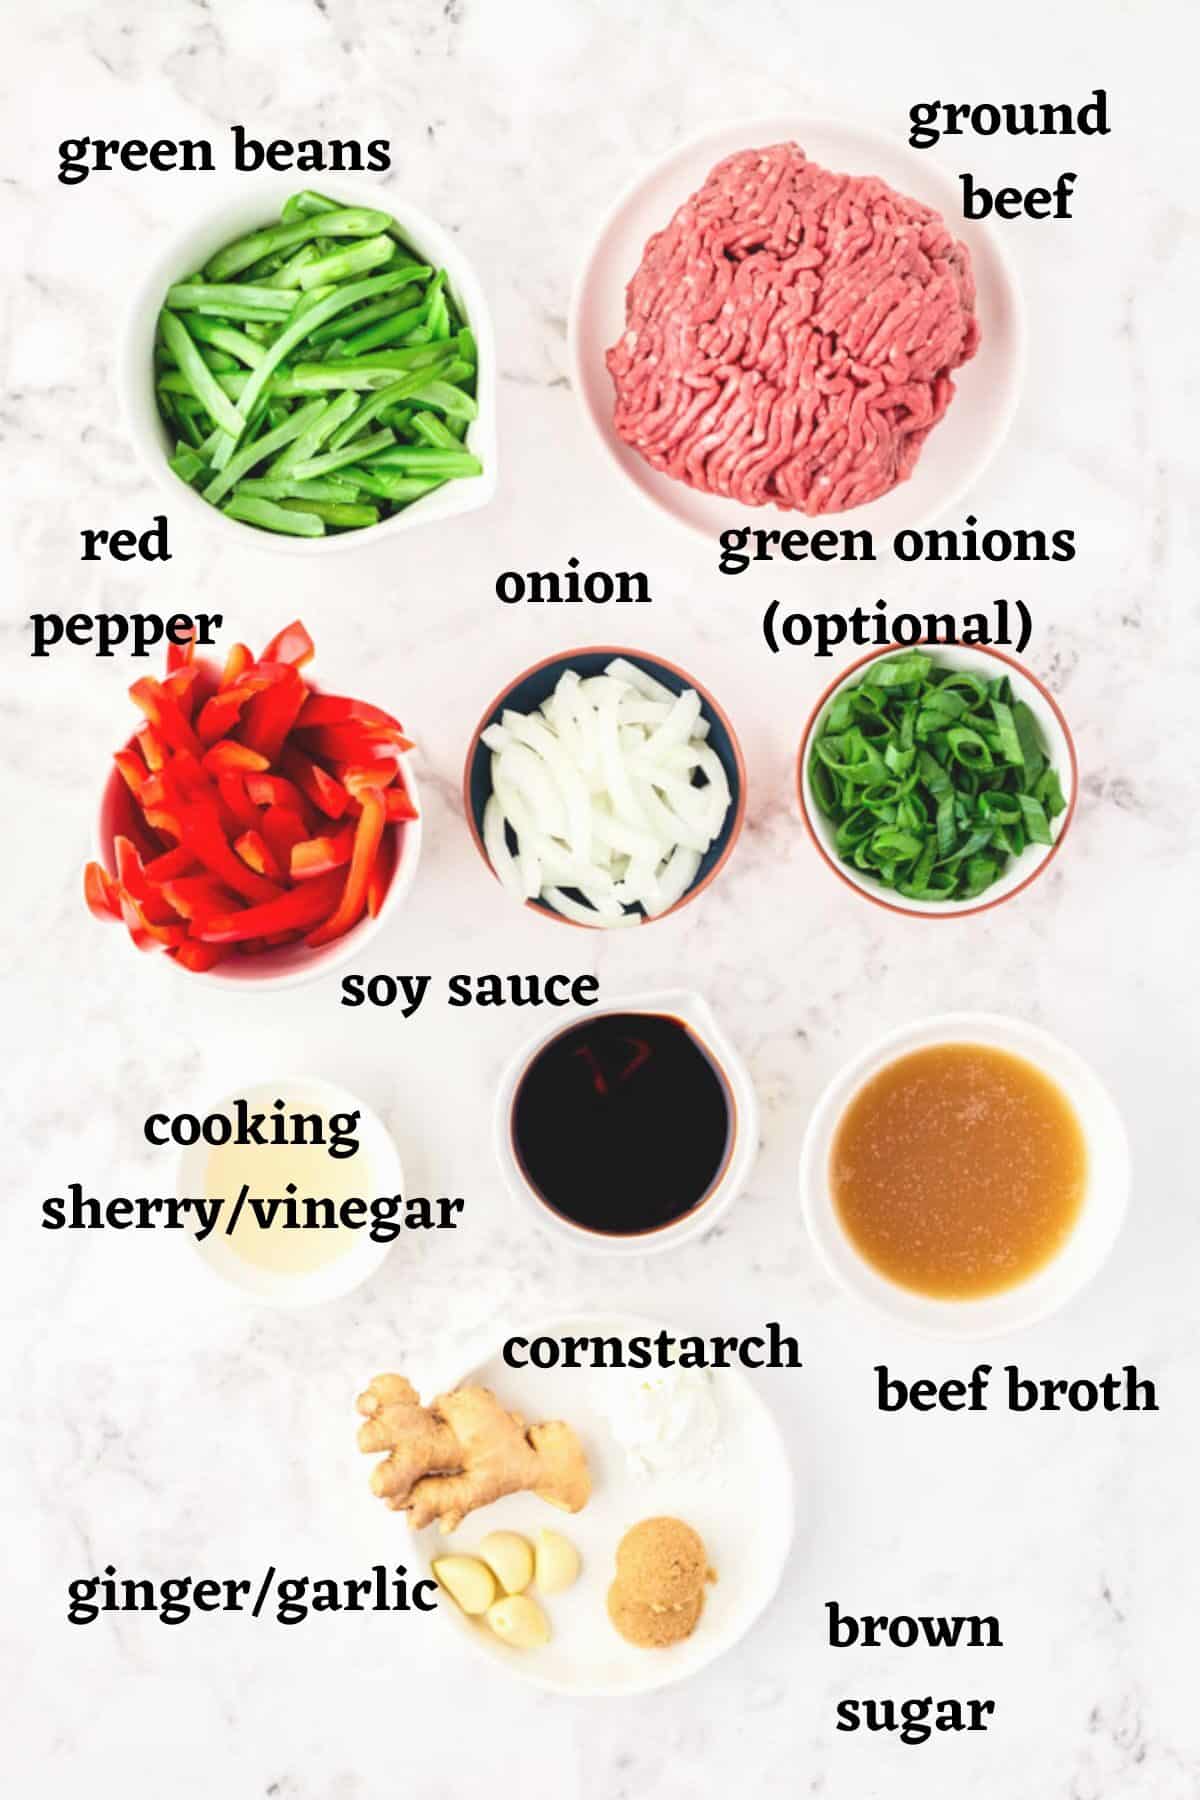 Ingredients needed to make this Ground Beef Stir Fry Recipe.